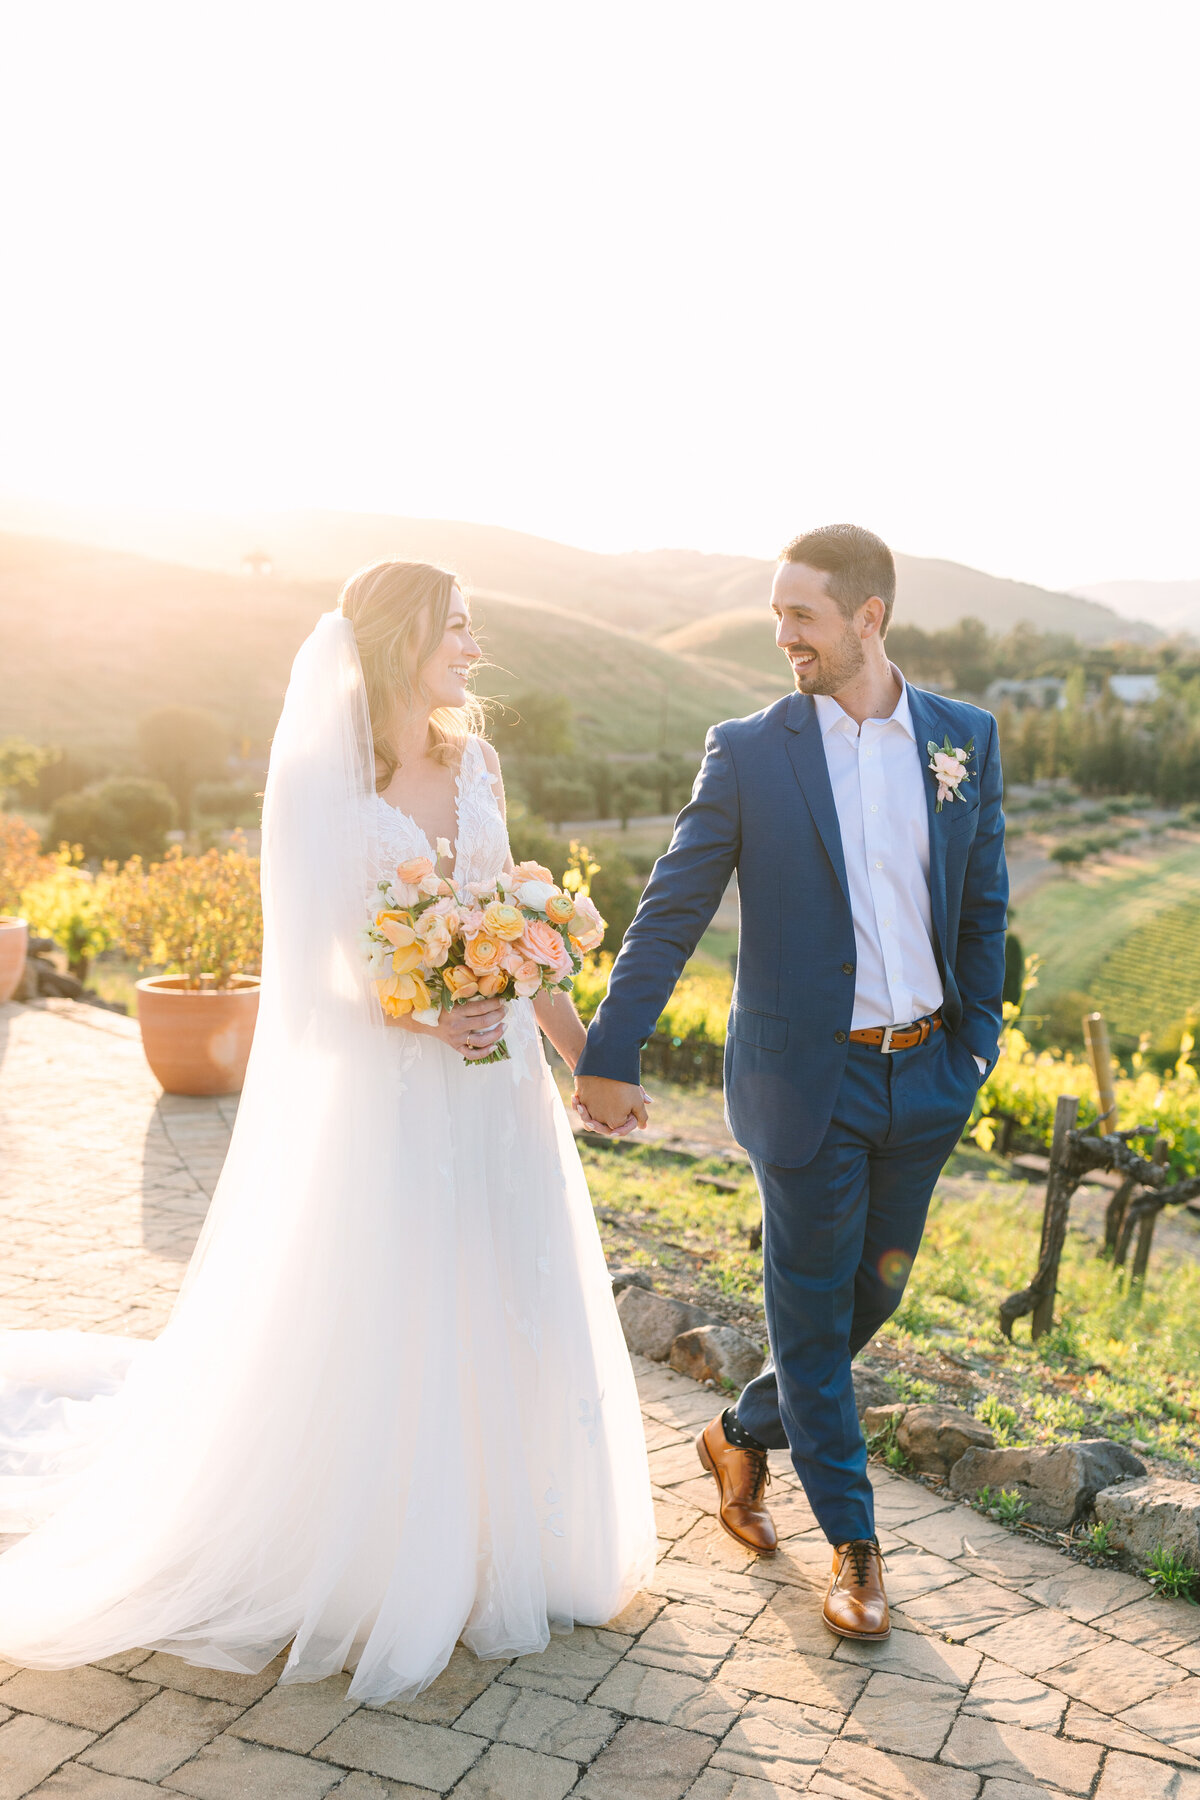 bride with floral bouquet holding hands with groom in napa valley vineyard at golden hour.